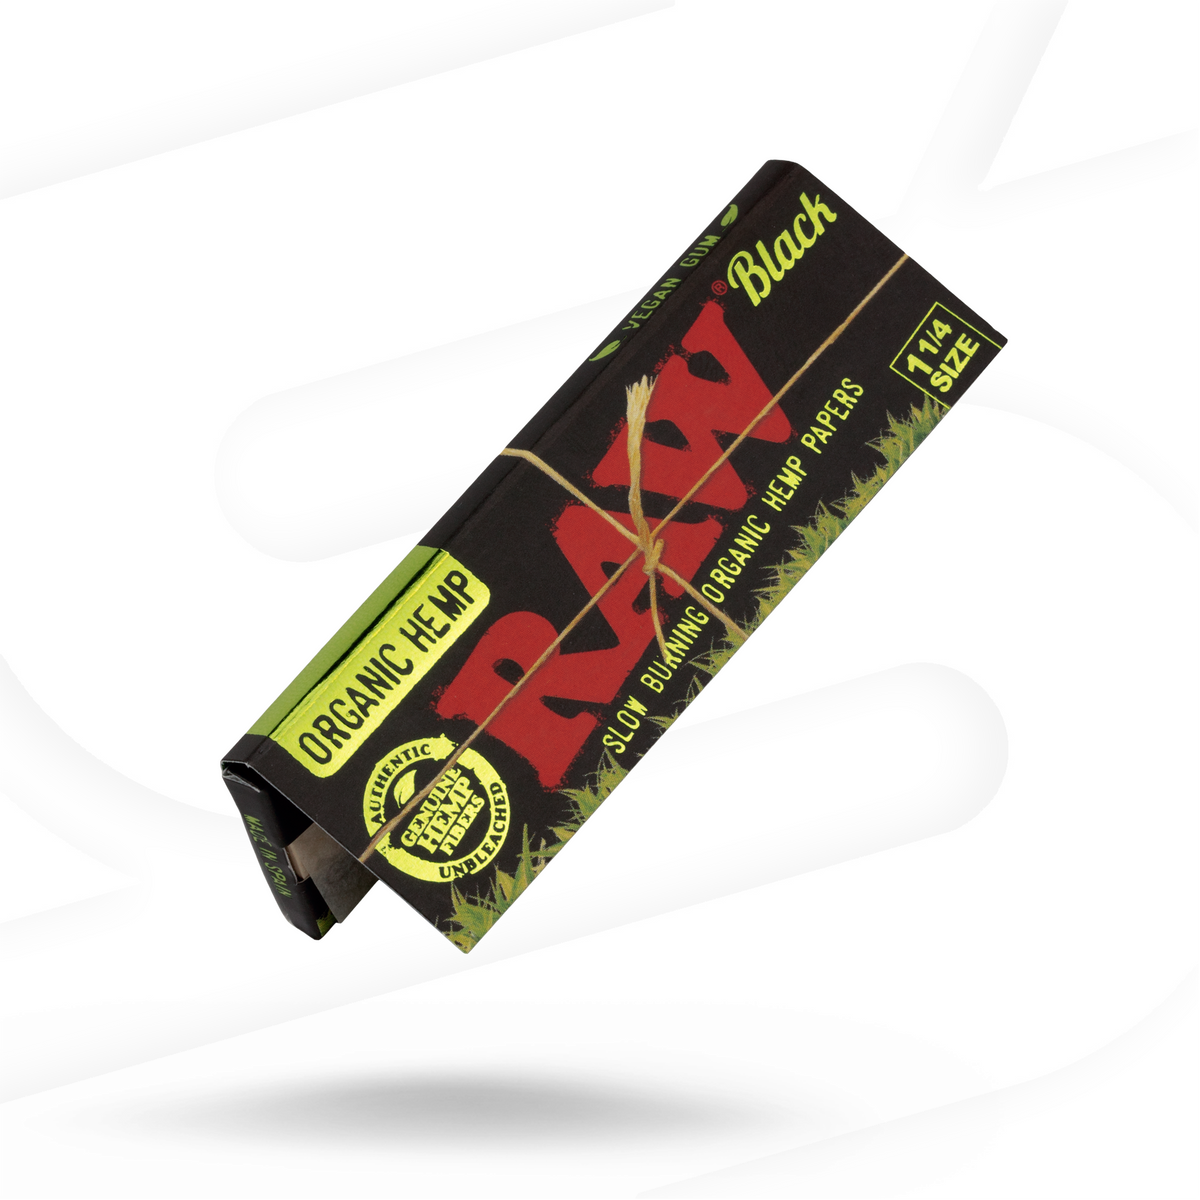 RAW Black 1 1/4 Organic Hemp Rolling Papers Rolling Papers esd-official